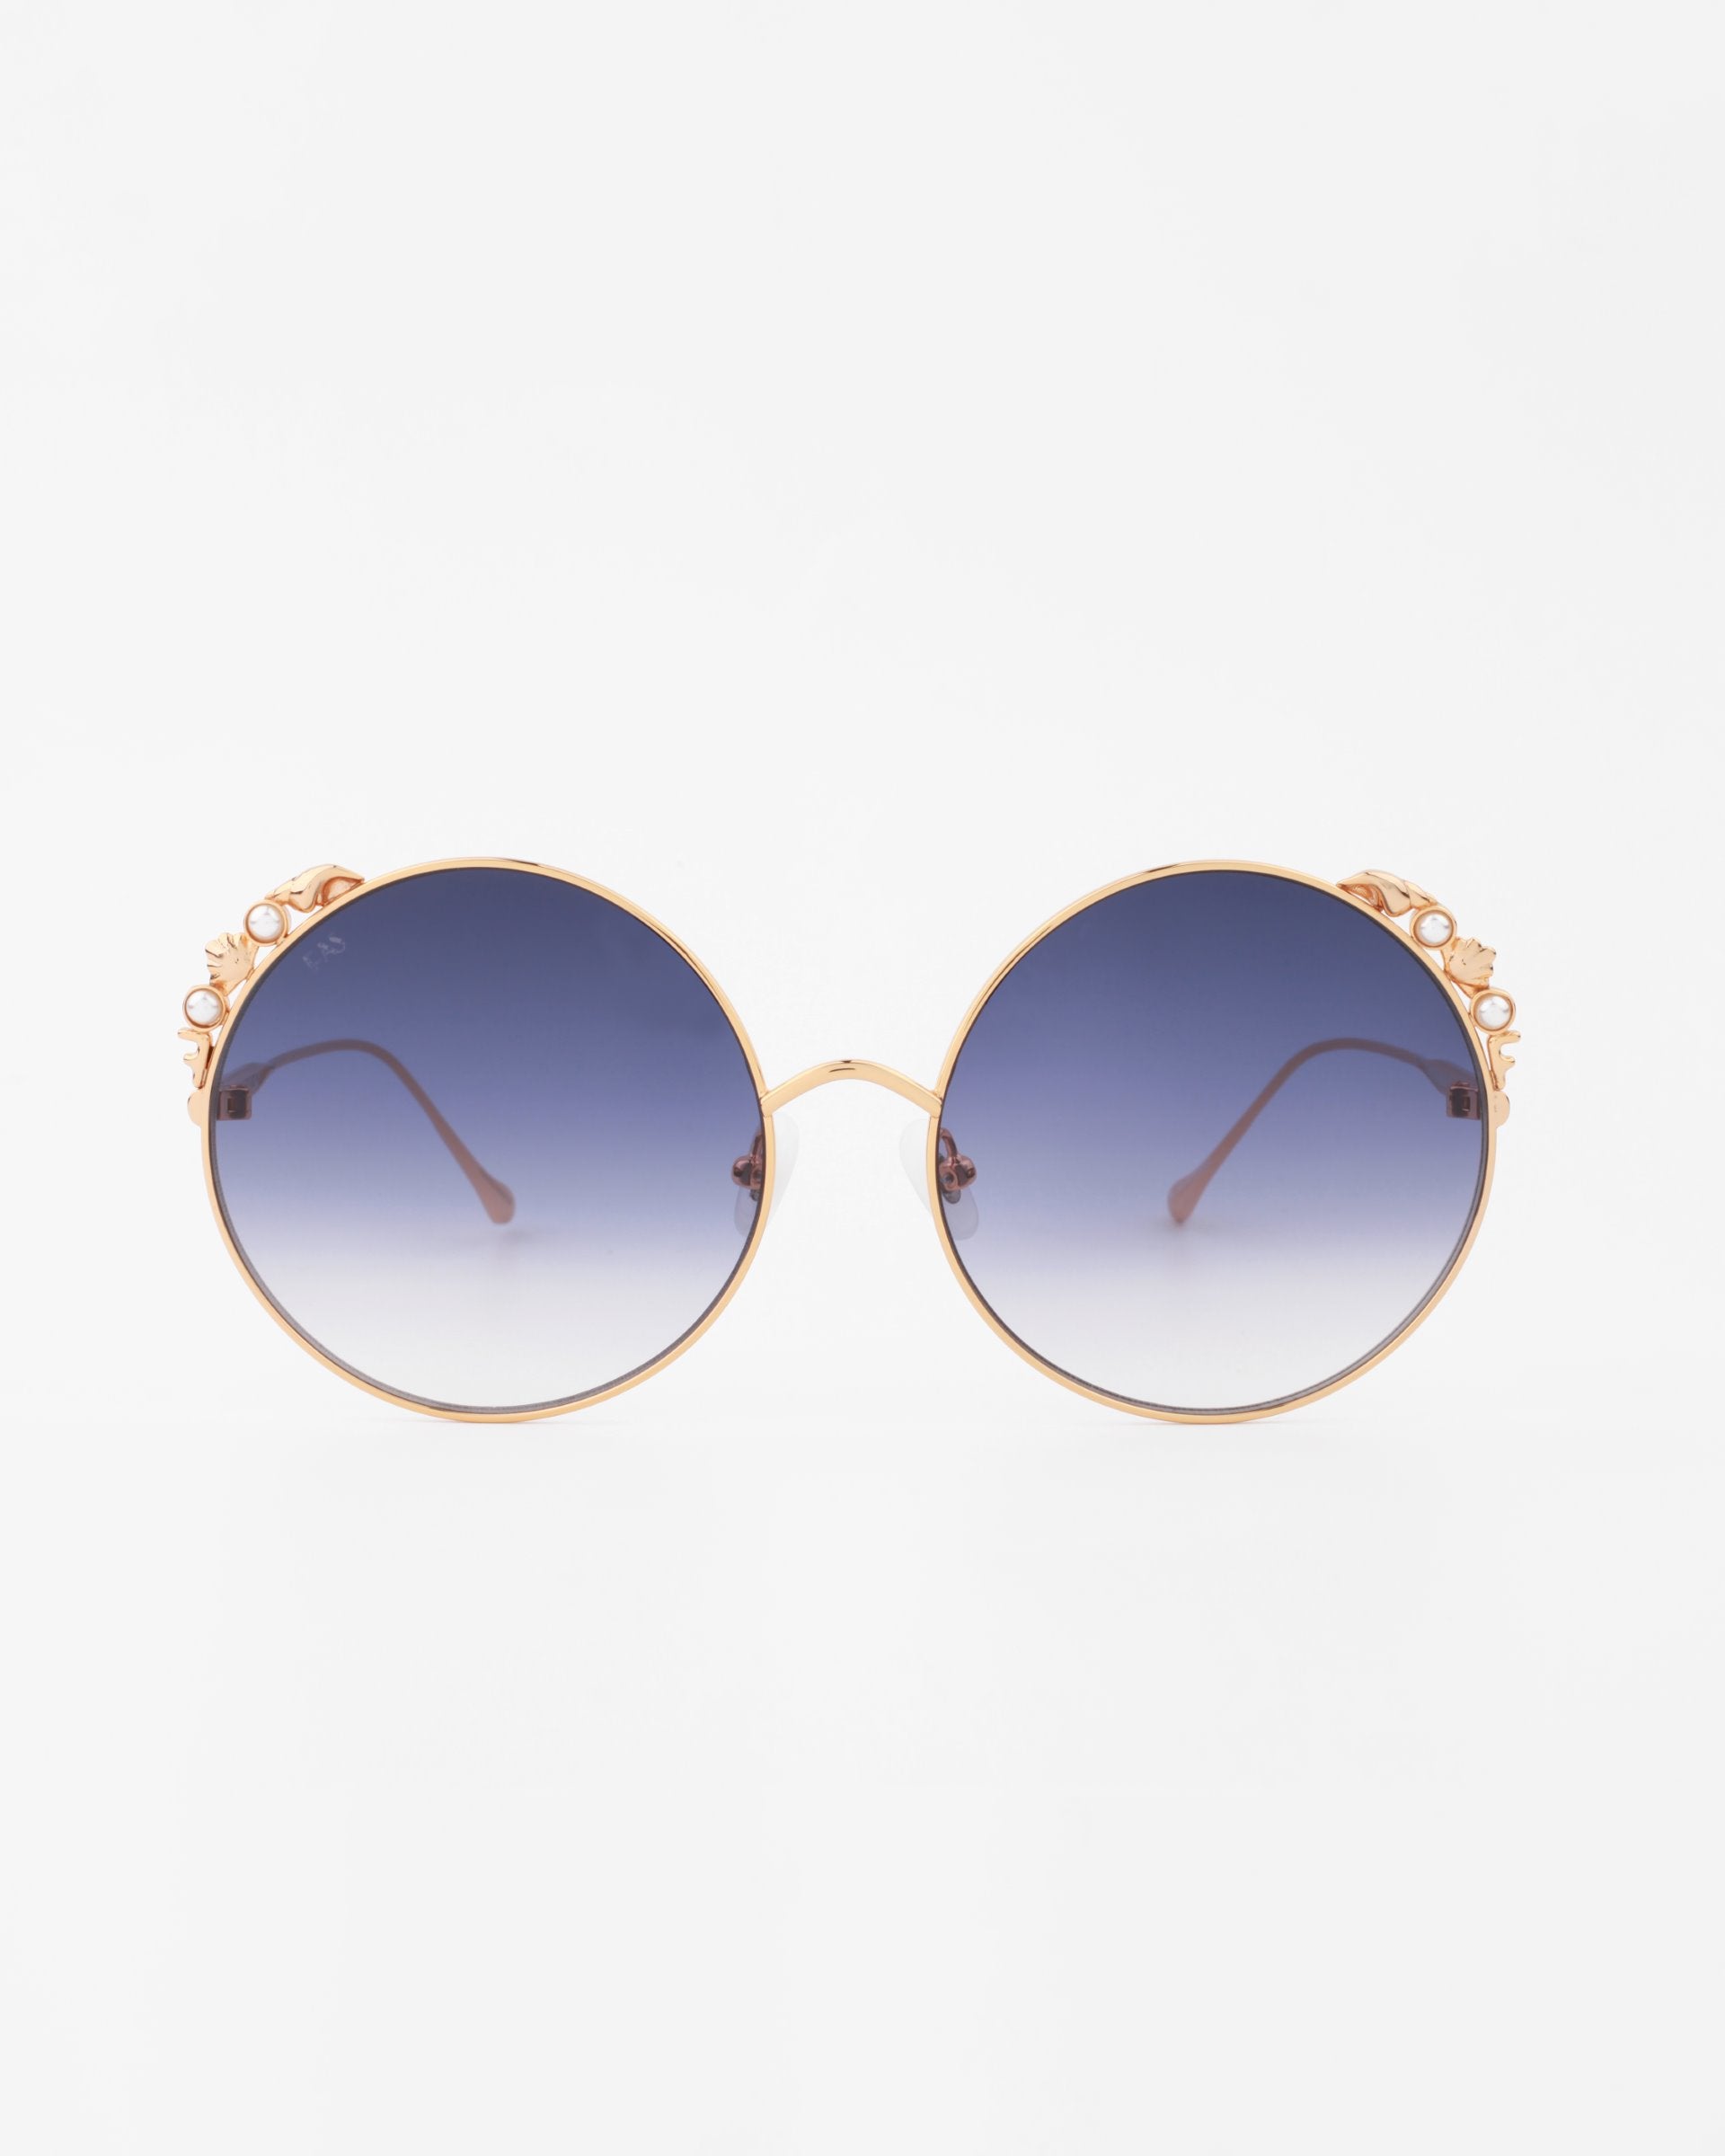 A pair of For Art's Sake® Lindy handmade gold-plated round sunglasses with ultra-lightweight shatter-resistant dark blue gradient lenses. The bridge and end pieces have a decorative floral embellishment, offering 100% UVA & UVB protection. The For Art's Sake® Lindy sunglasses are set against a plain white background.